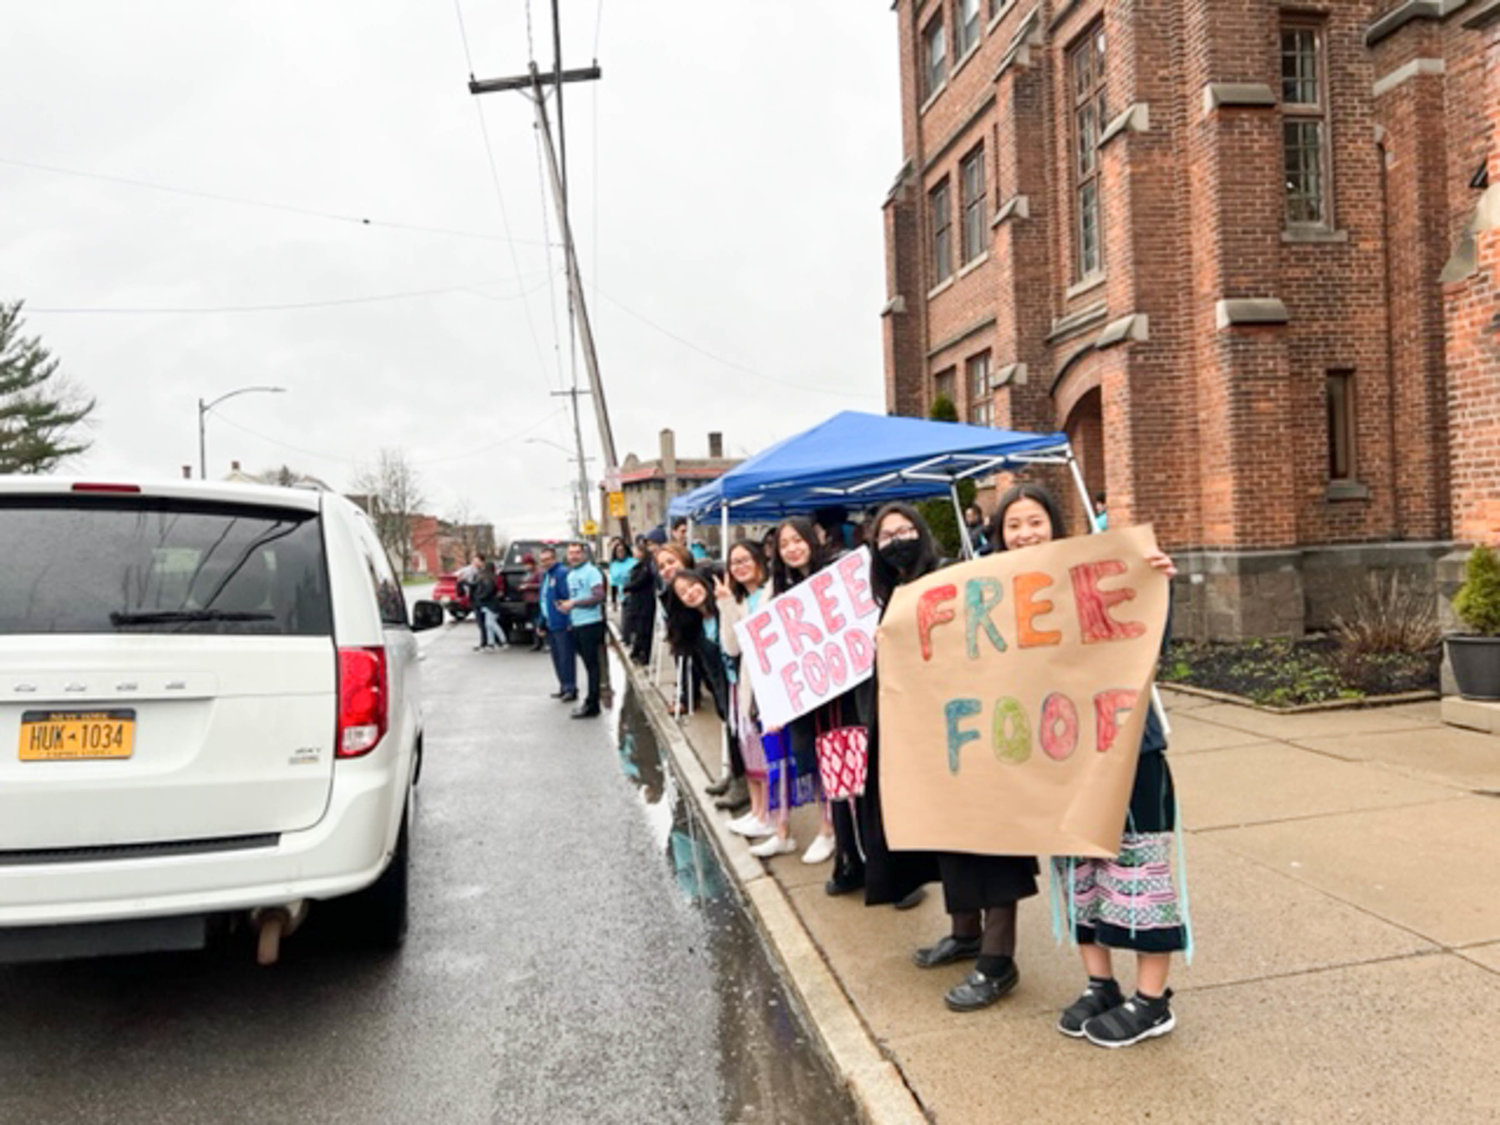 HELP FOR HUNGRY — Four of the Seventh-Day Adventist Churches in Utica gave away 203 baskets of food and toiletries to families in need, according to event organizers. Above, volunteers stand outside in the rain waiting to help load up arriving residents.